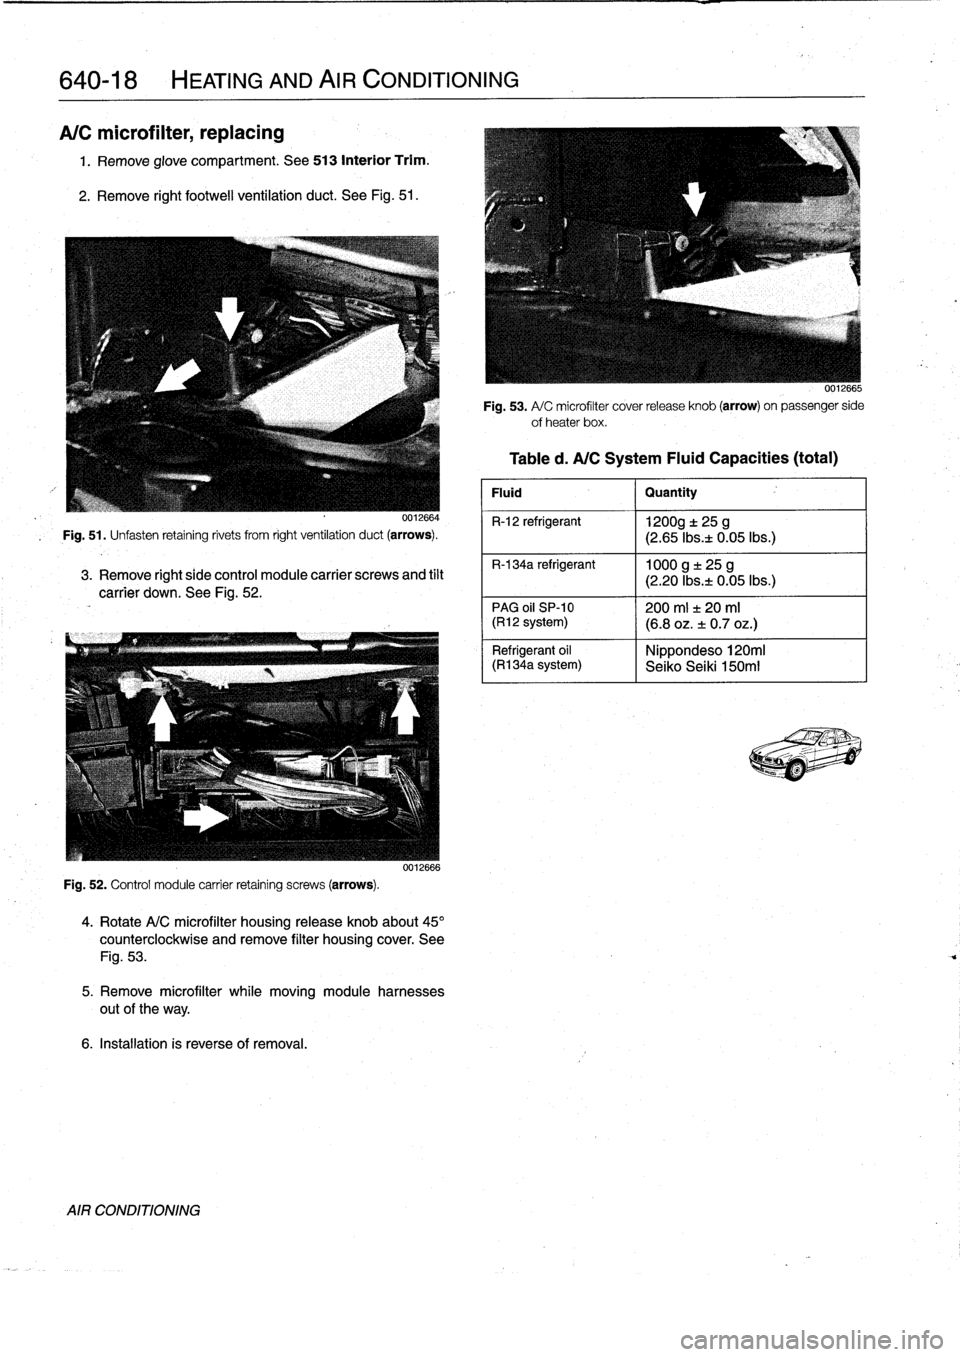 BMW 318i 1997 E36 User Guide 
640-18

	

HEATING
AND
AIR
CONDITIONING

A/C
microfilter,
replacing

1
.
Remove
glove
compartment
.
See
513
Interior
Trim
.

2
.
Remove
right
footwell
ventilation
duct
.
See
Fig
.
51
.

0012664

Fig
